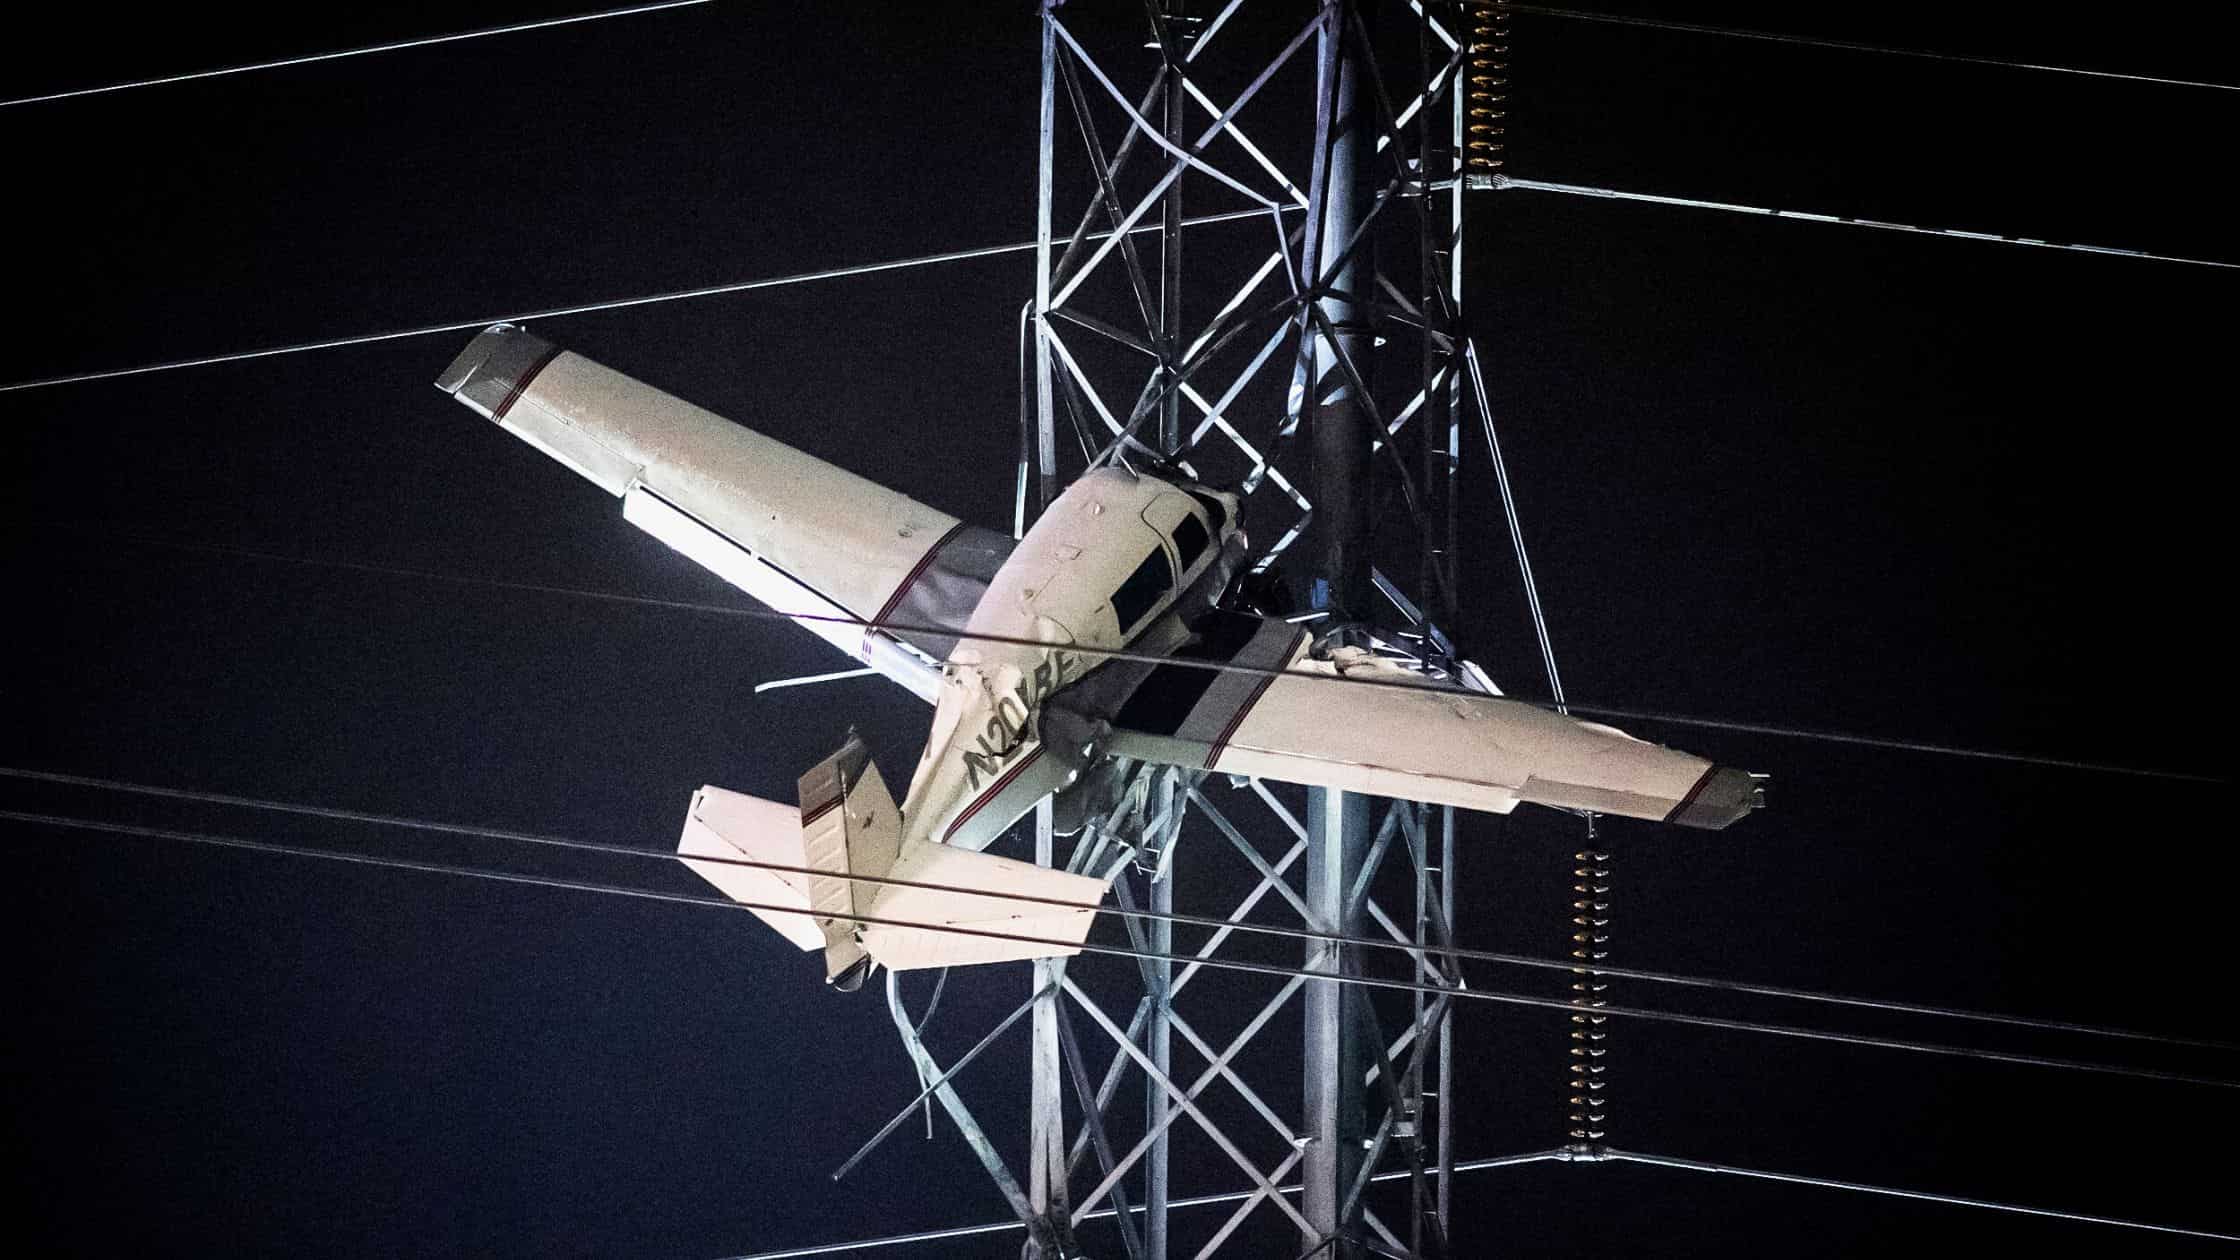 A Small Plane Carrying Two People Hangs 100 Feet In The Air After Colliding With A Power Tower